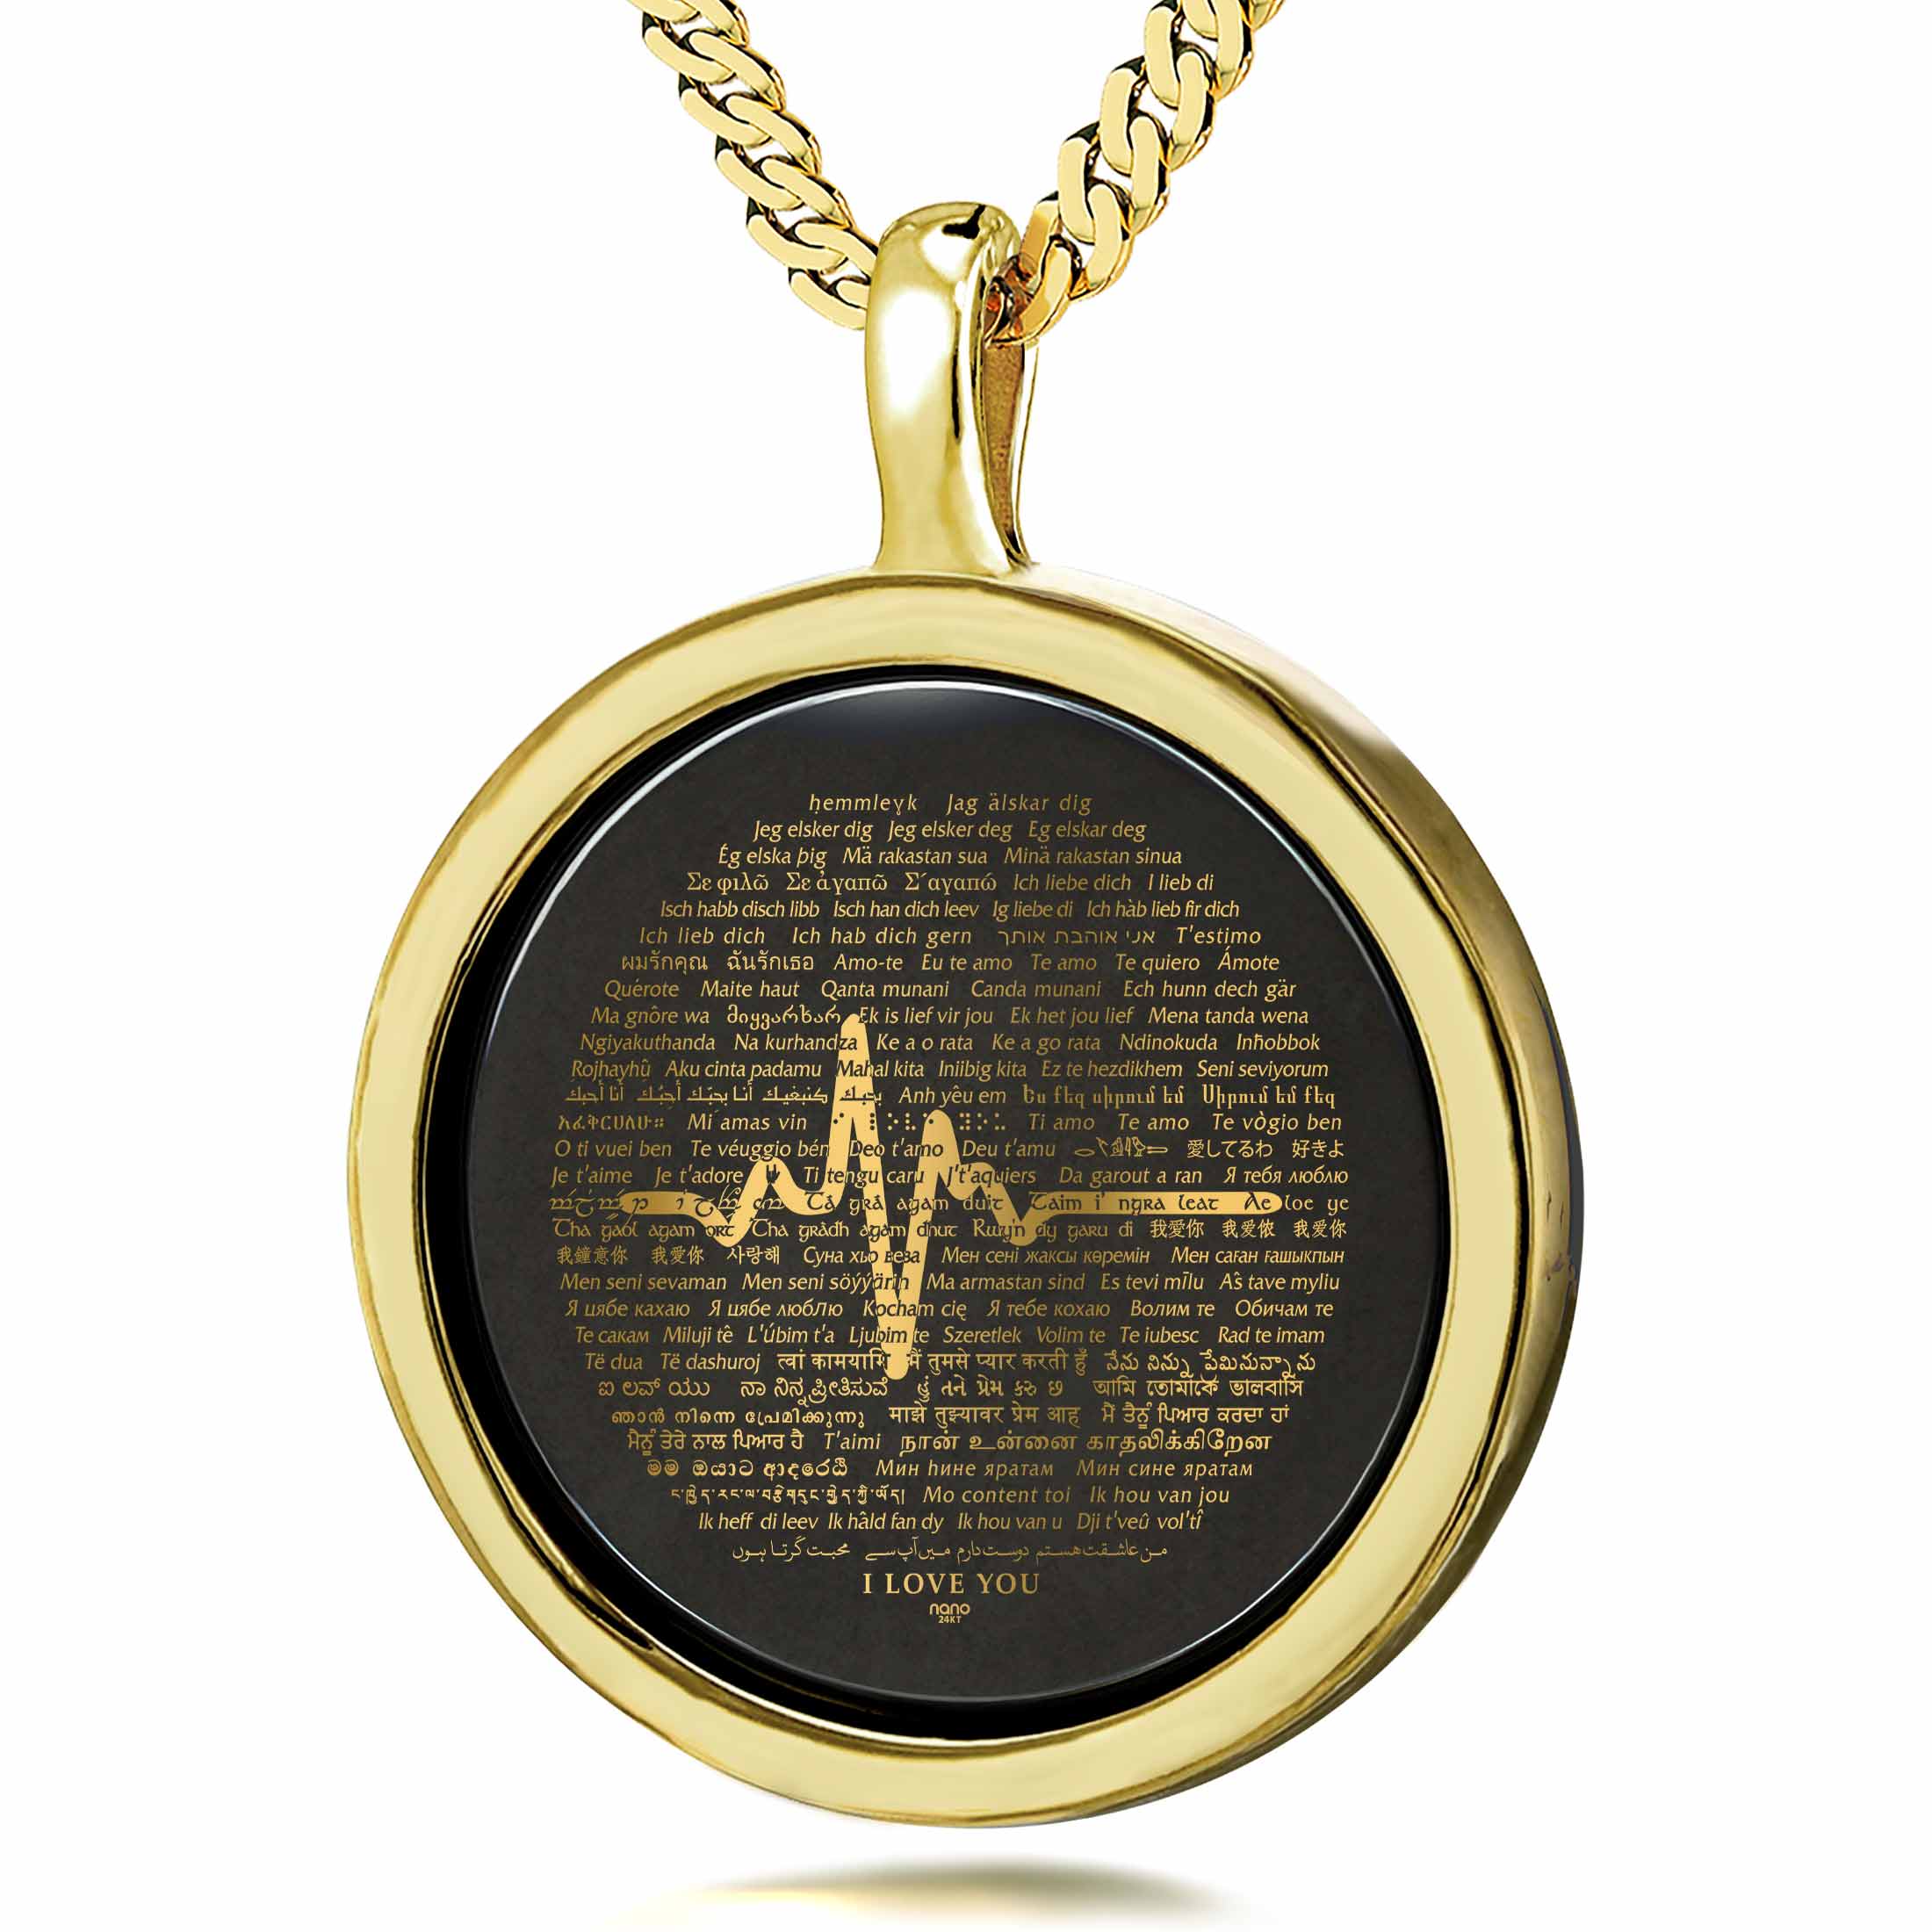 An ornate His Heartbeat of Love Necklace Over 100 Languages I Love You Pendant with golden text in various languages and scripts expressing "I Love You" on a textured background, making it a romantic gift.